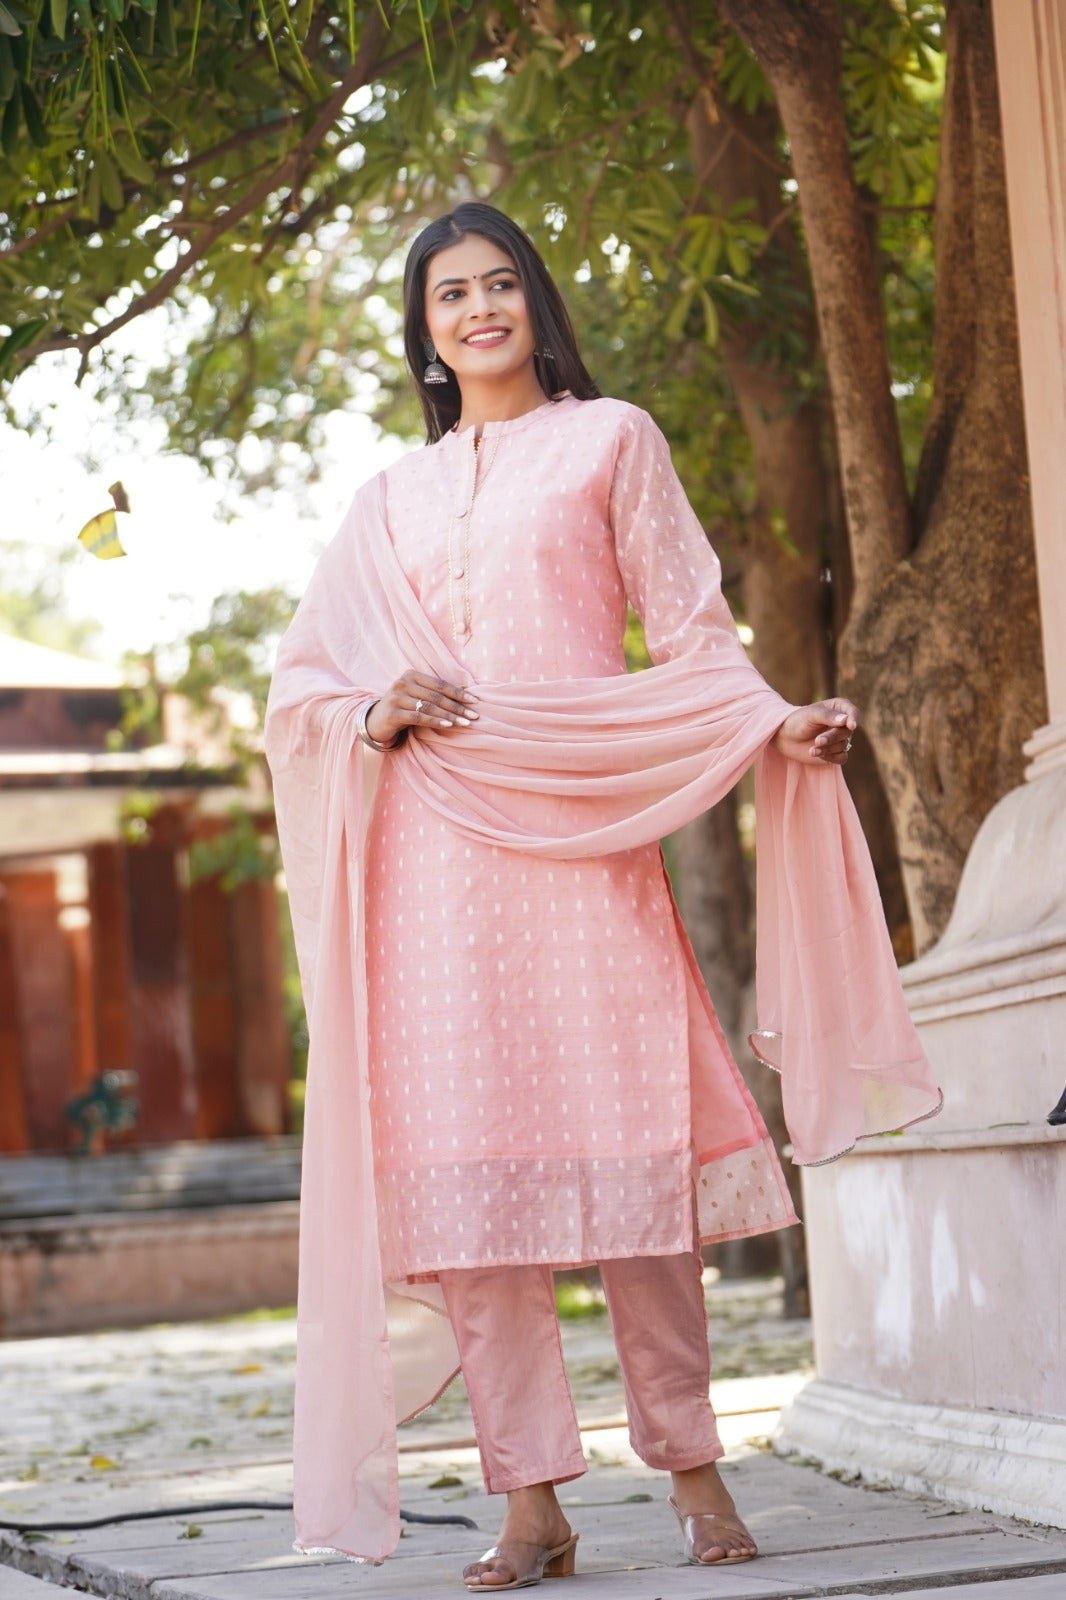 This beautiful Zari Foil Print Chanderi Silk Kurta Set is a luxurious and elegant choice for any occasion. The intricate Zari foil print adds a touch of glamour, while the soft and breathable Chanderi silk fabric provides comfort and style